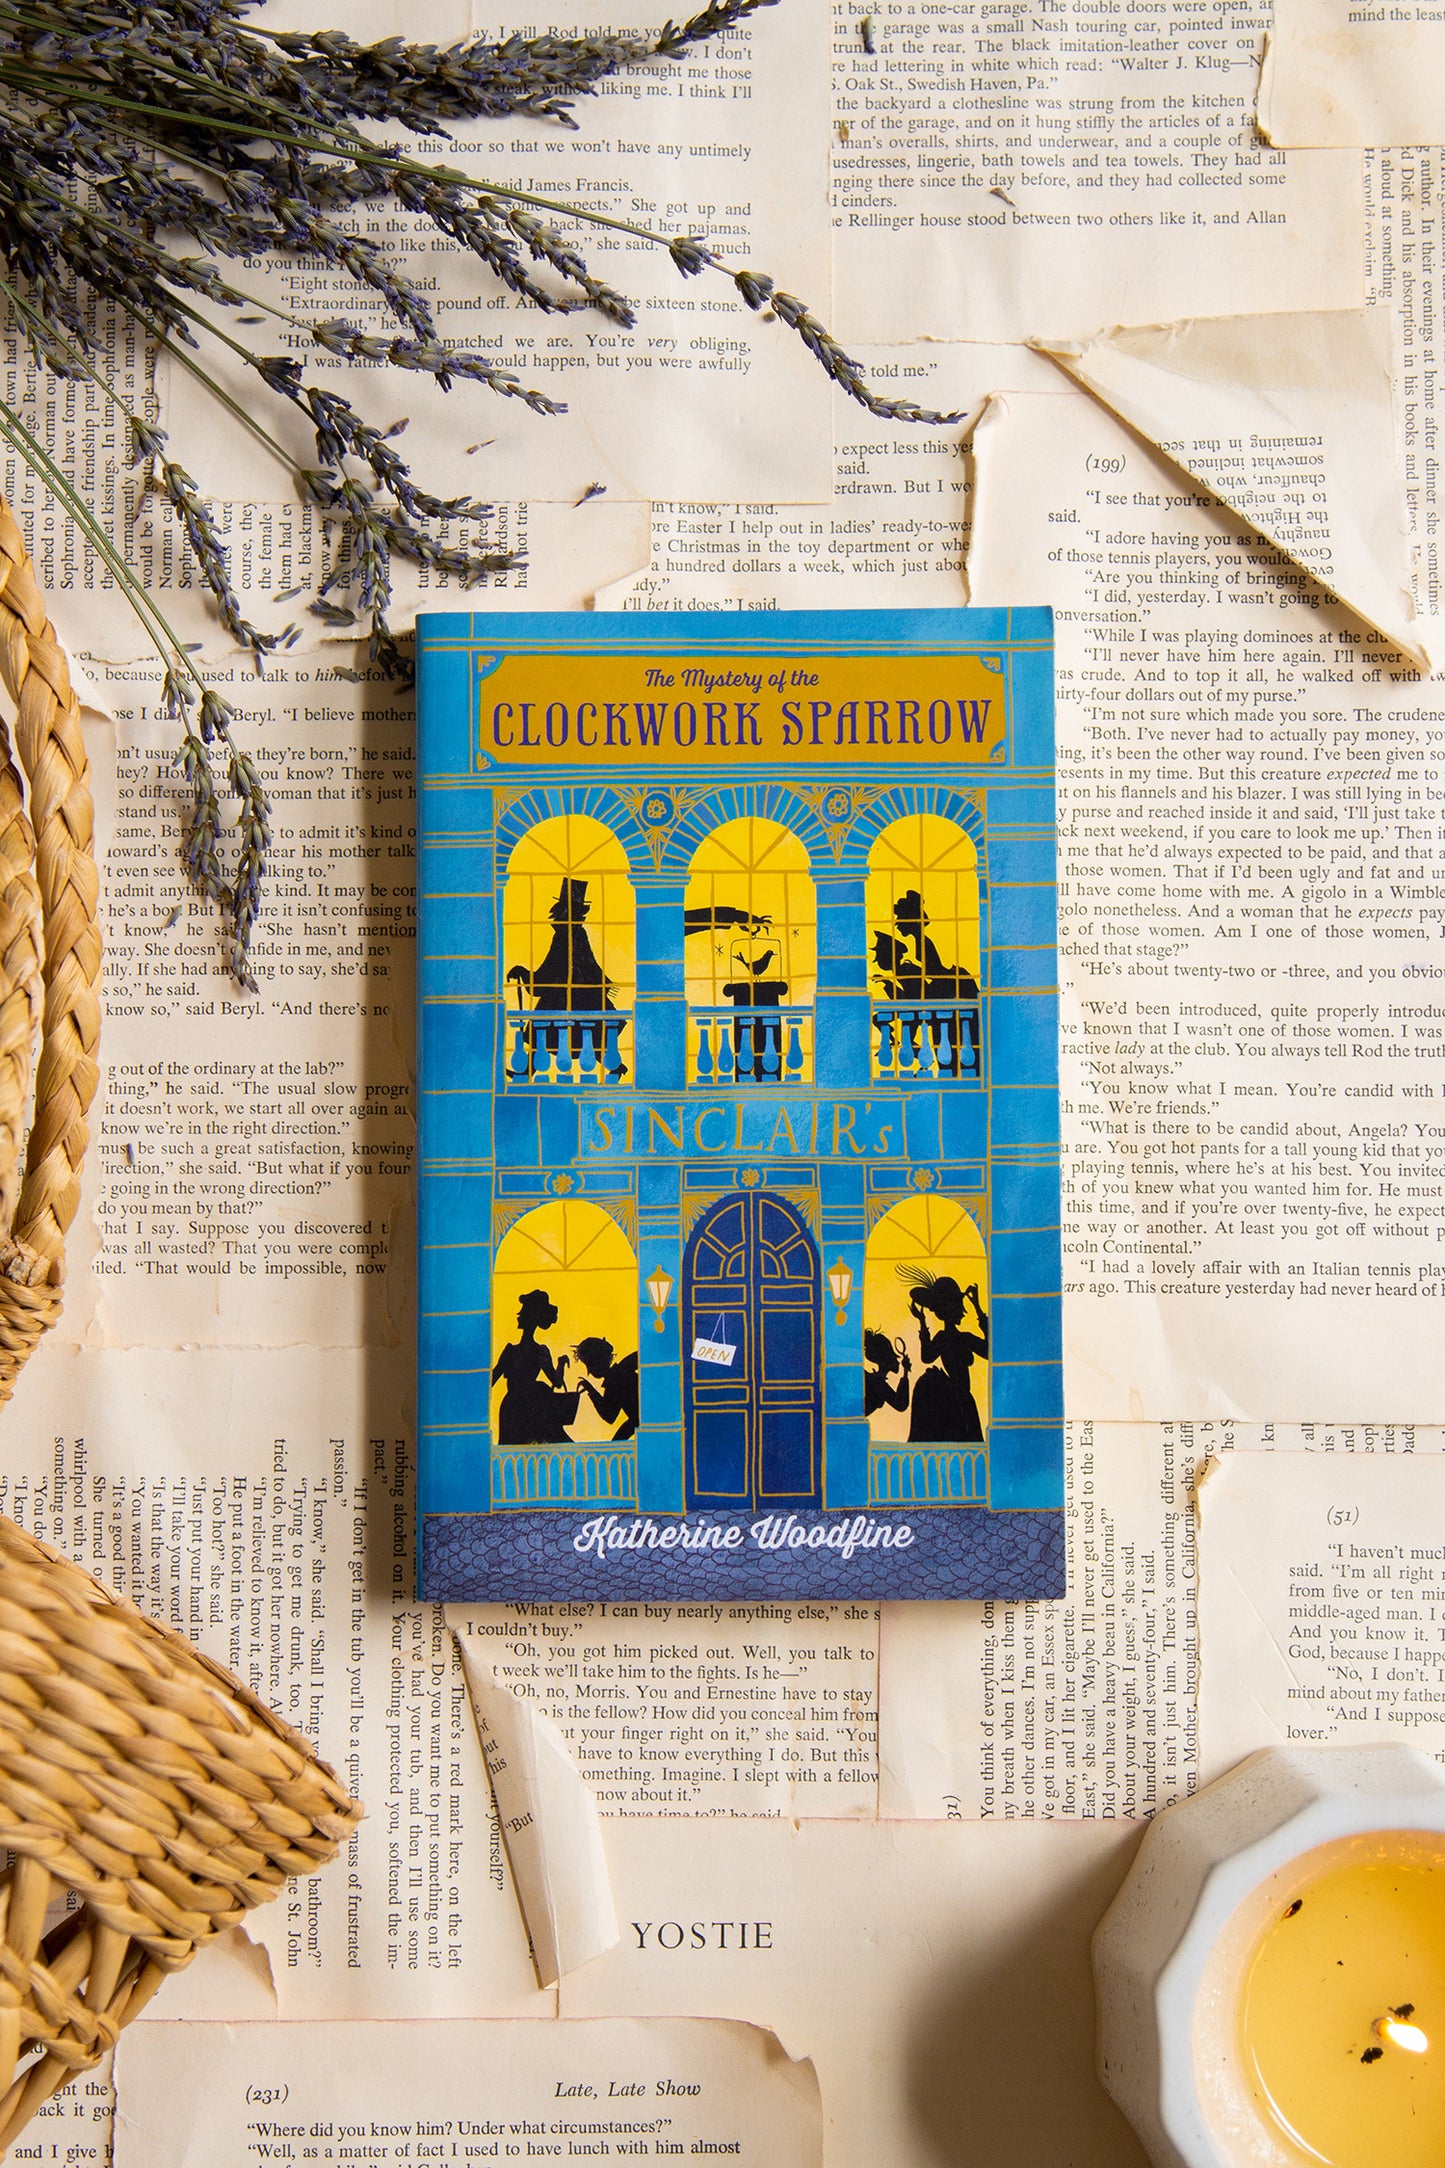 The Mystery of the Clockwork Sparrow by Katherine Woodfine